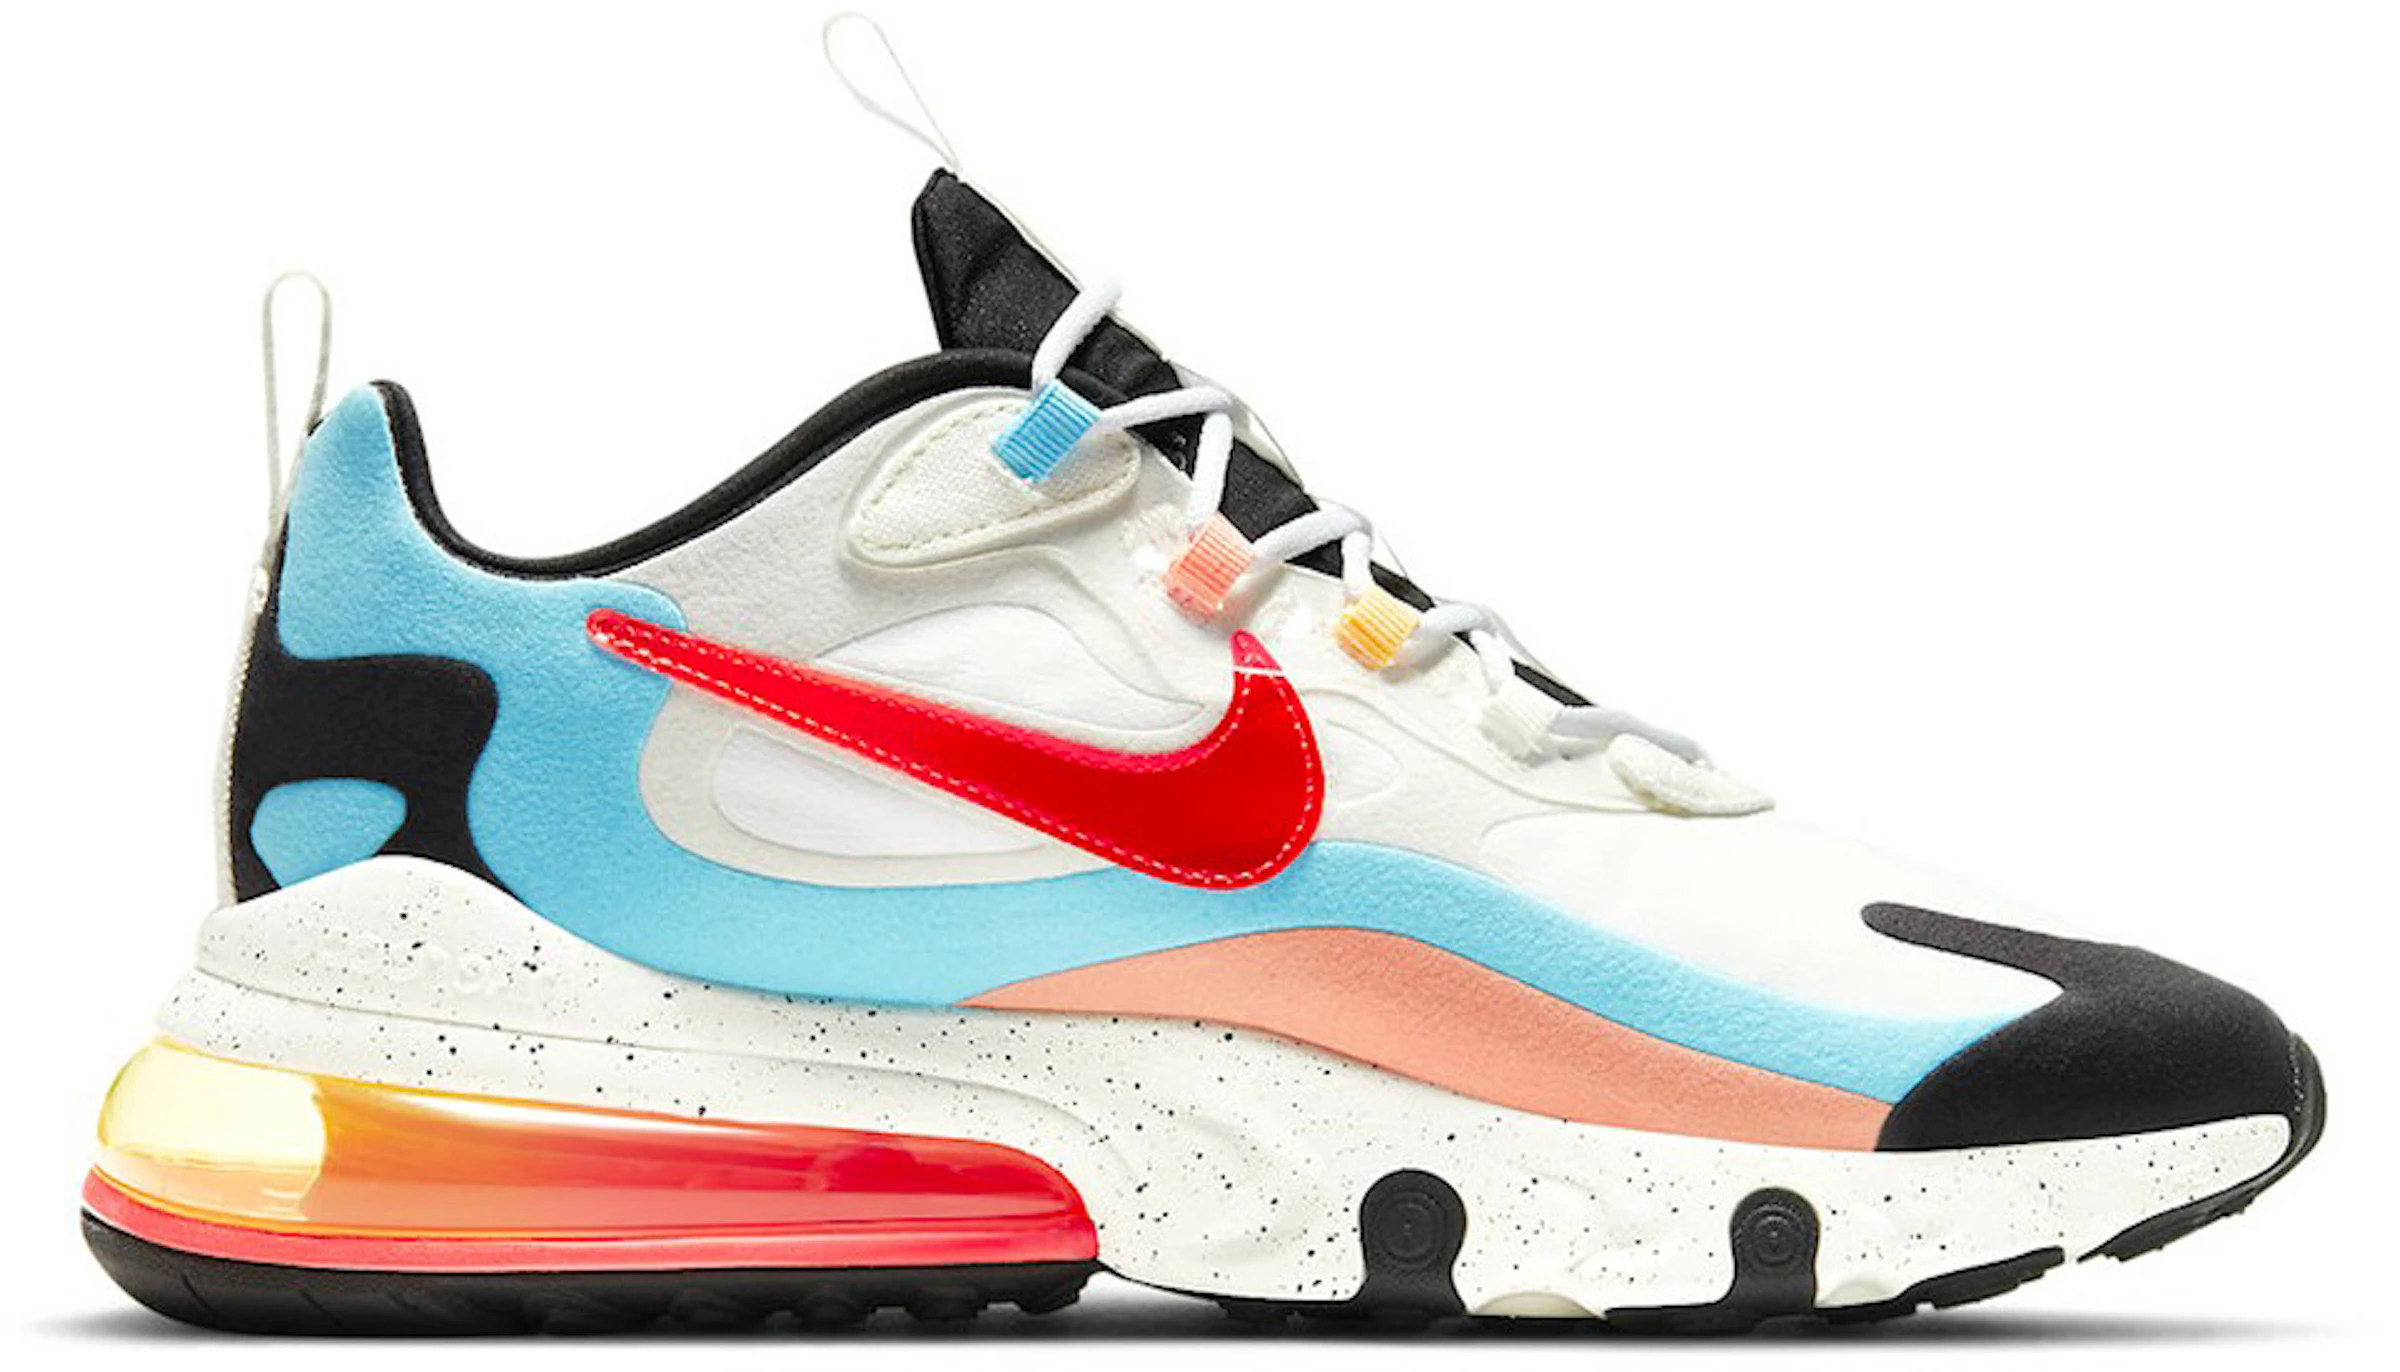 Air Max 270 React The Future is in the Air - DD8498-161 - US